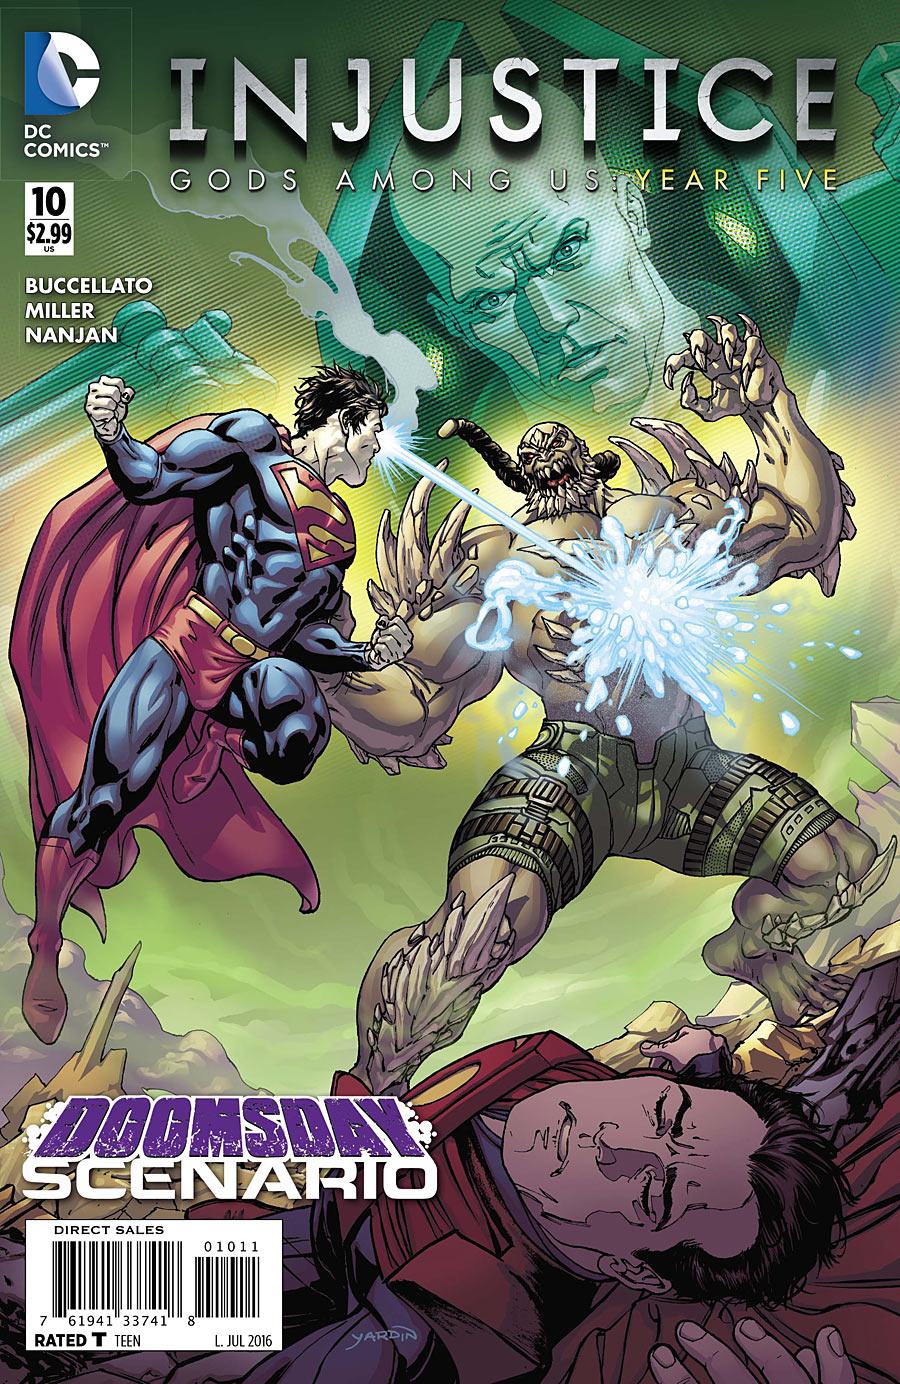 Injustice: Gods Among Us: Year Five Vol. 1 #10